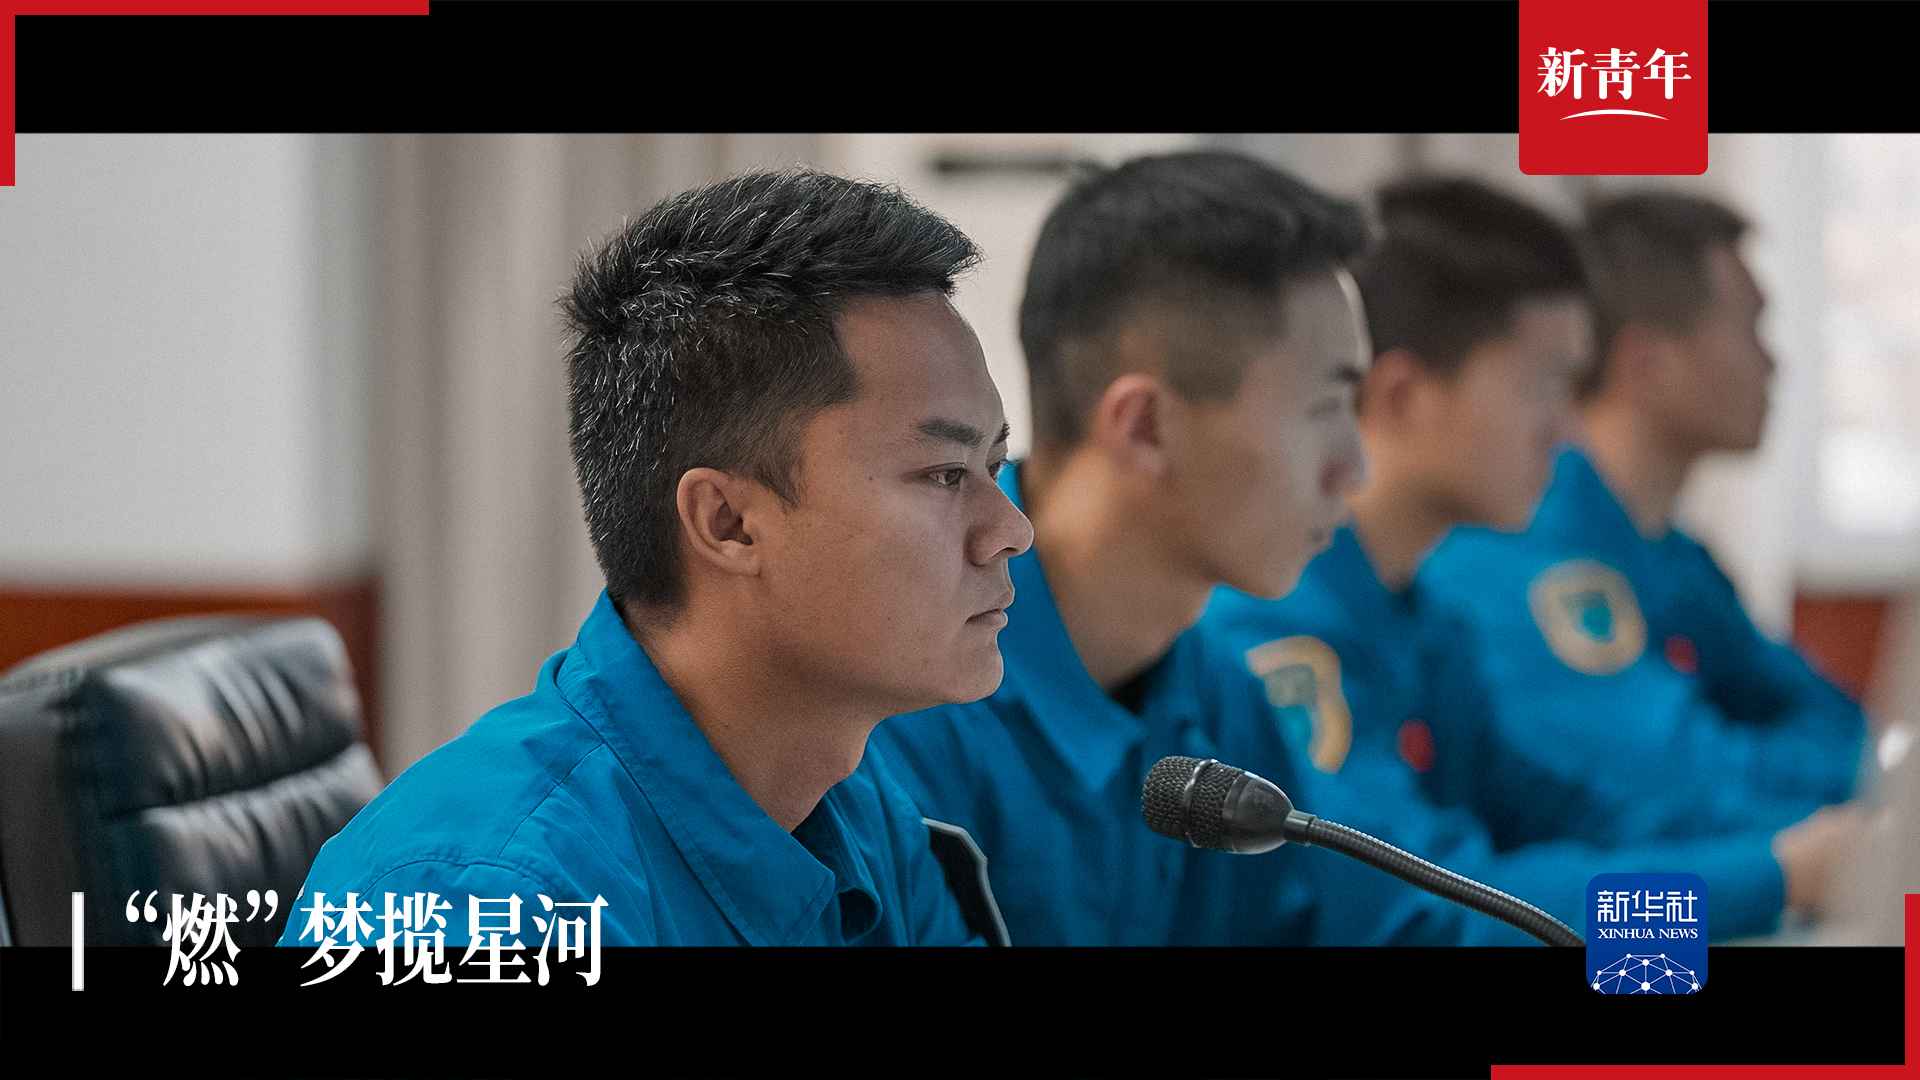 The youth of the post-90s generation is really "burning"!, New Youth | 90 Rocket Fuel Refueling Times Xinhua News Agency | Military Branch | Fuel | Youth